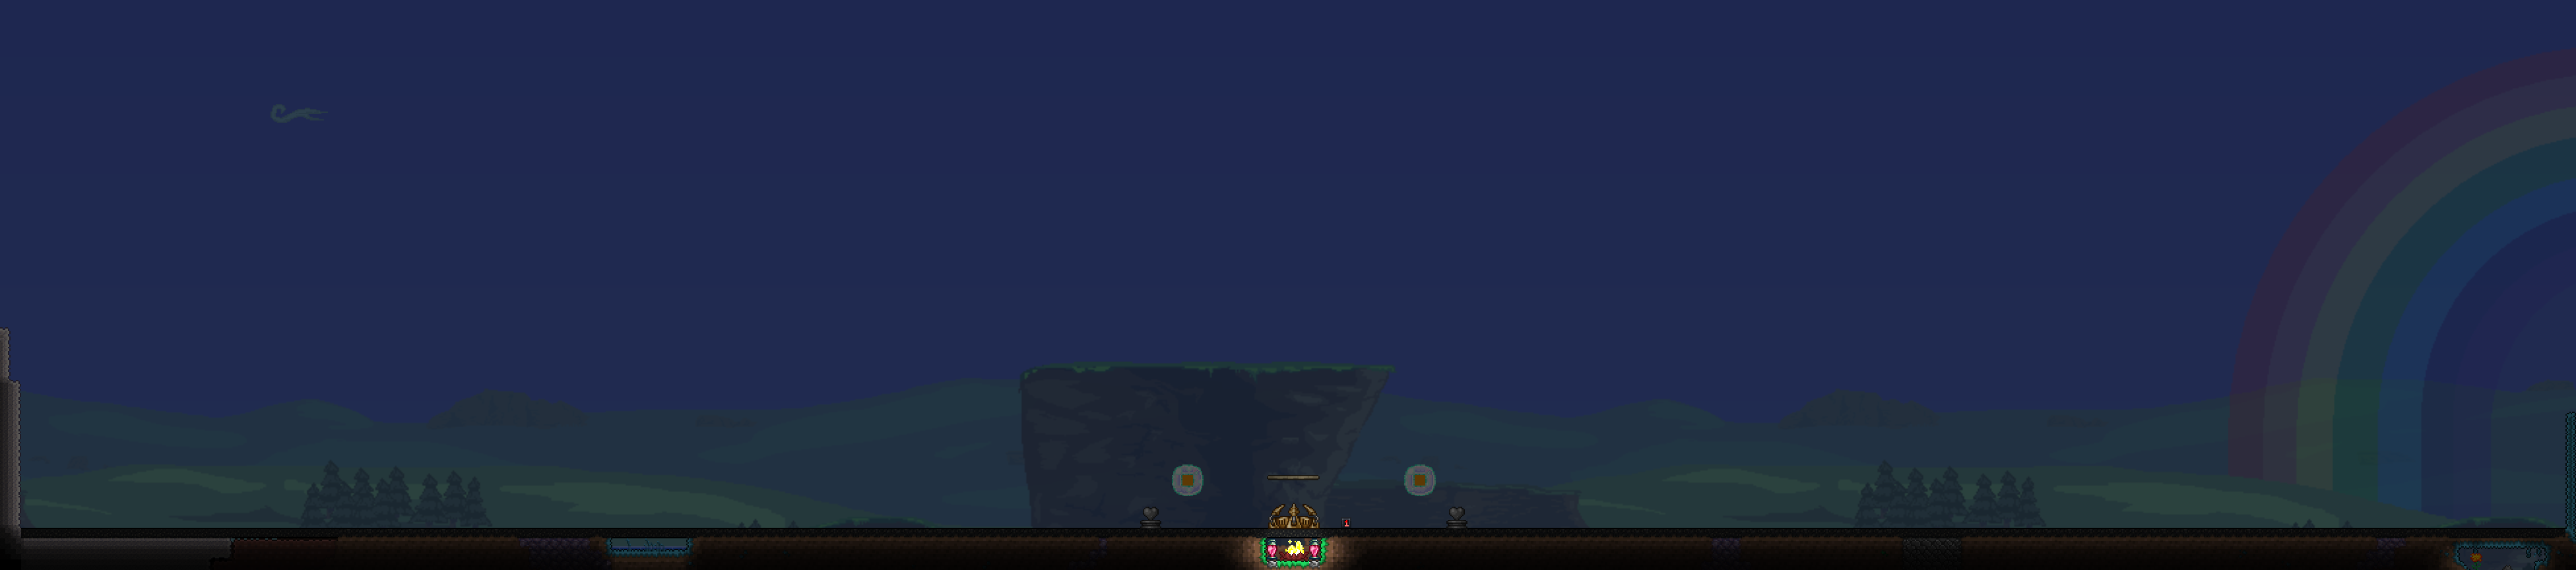 Incognito on X: In the process of building a HUGE boss arena #Terraria   / X